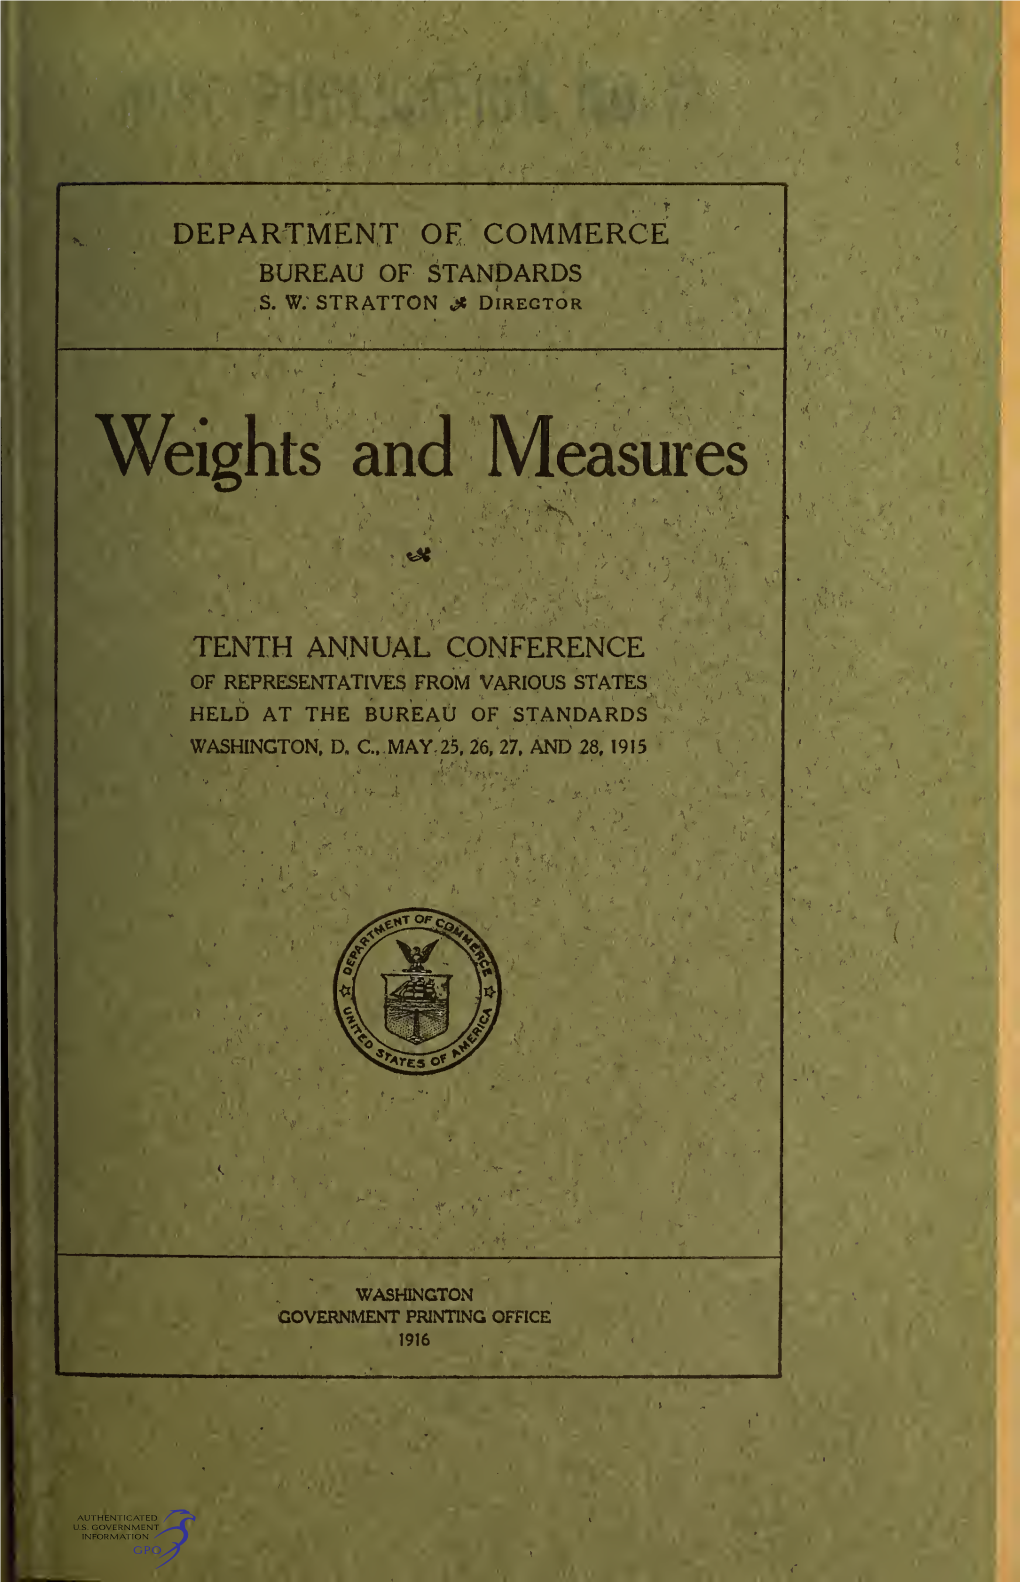 Weights and Measures Tenth Annual Conference